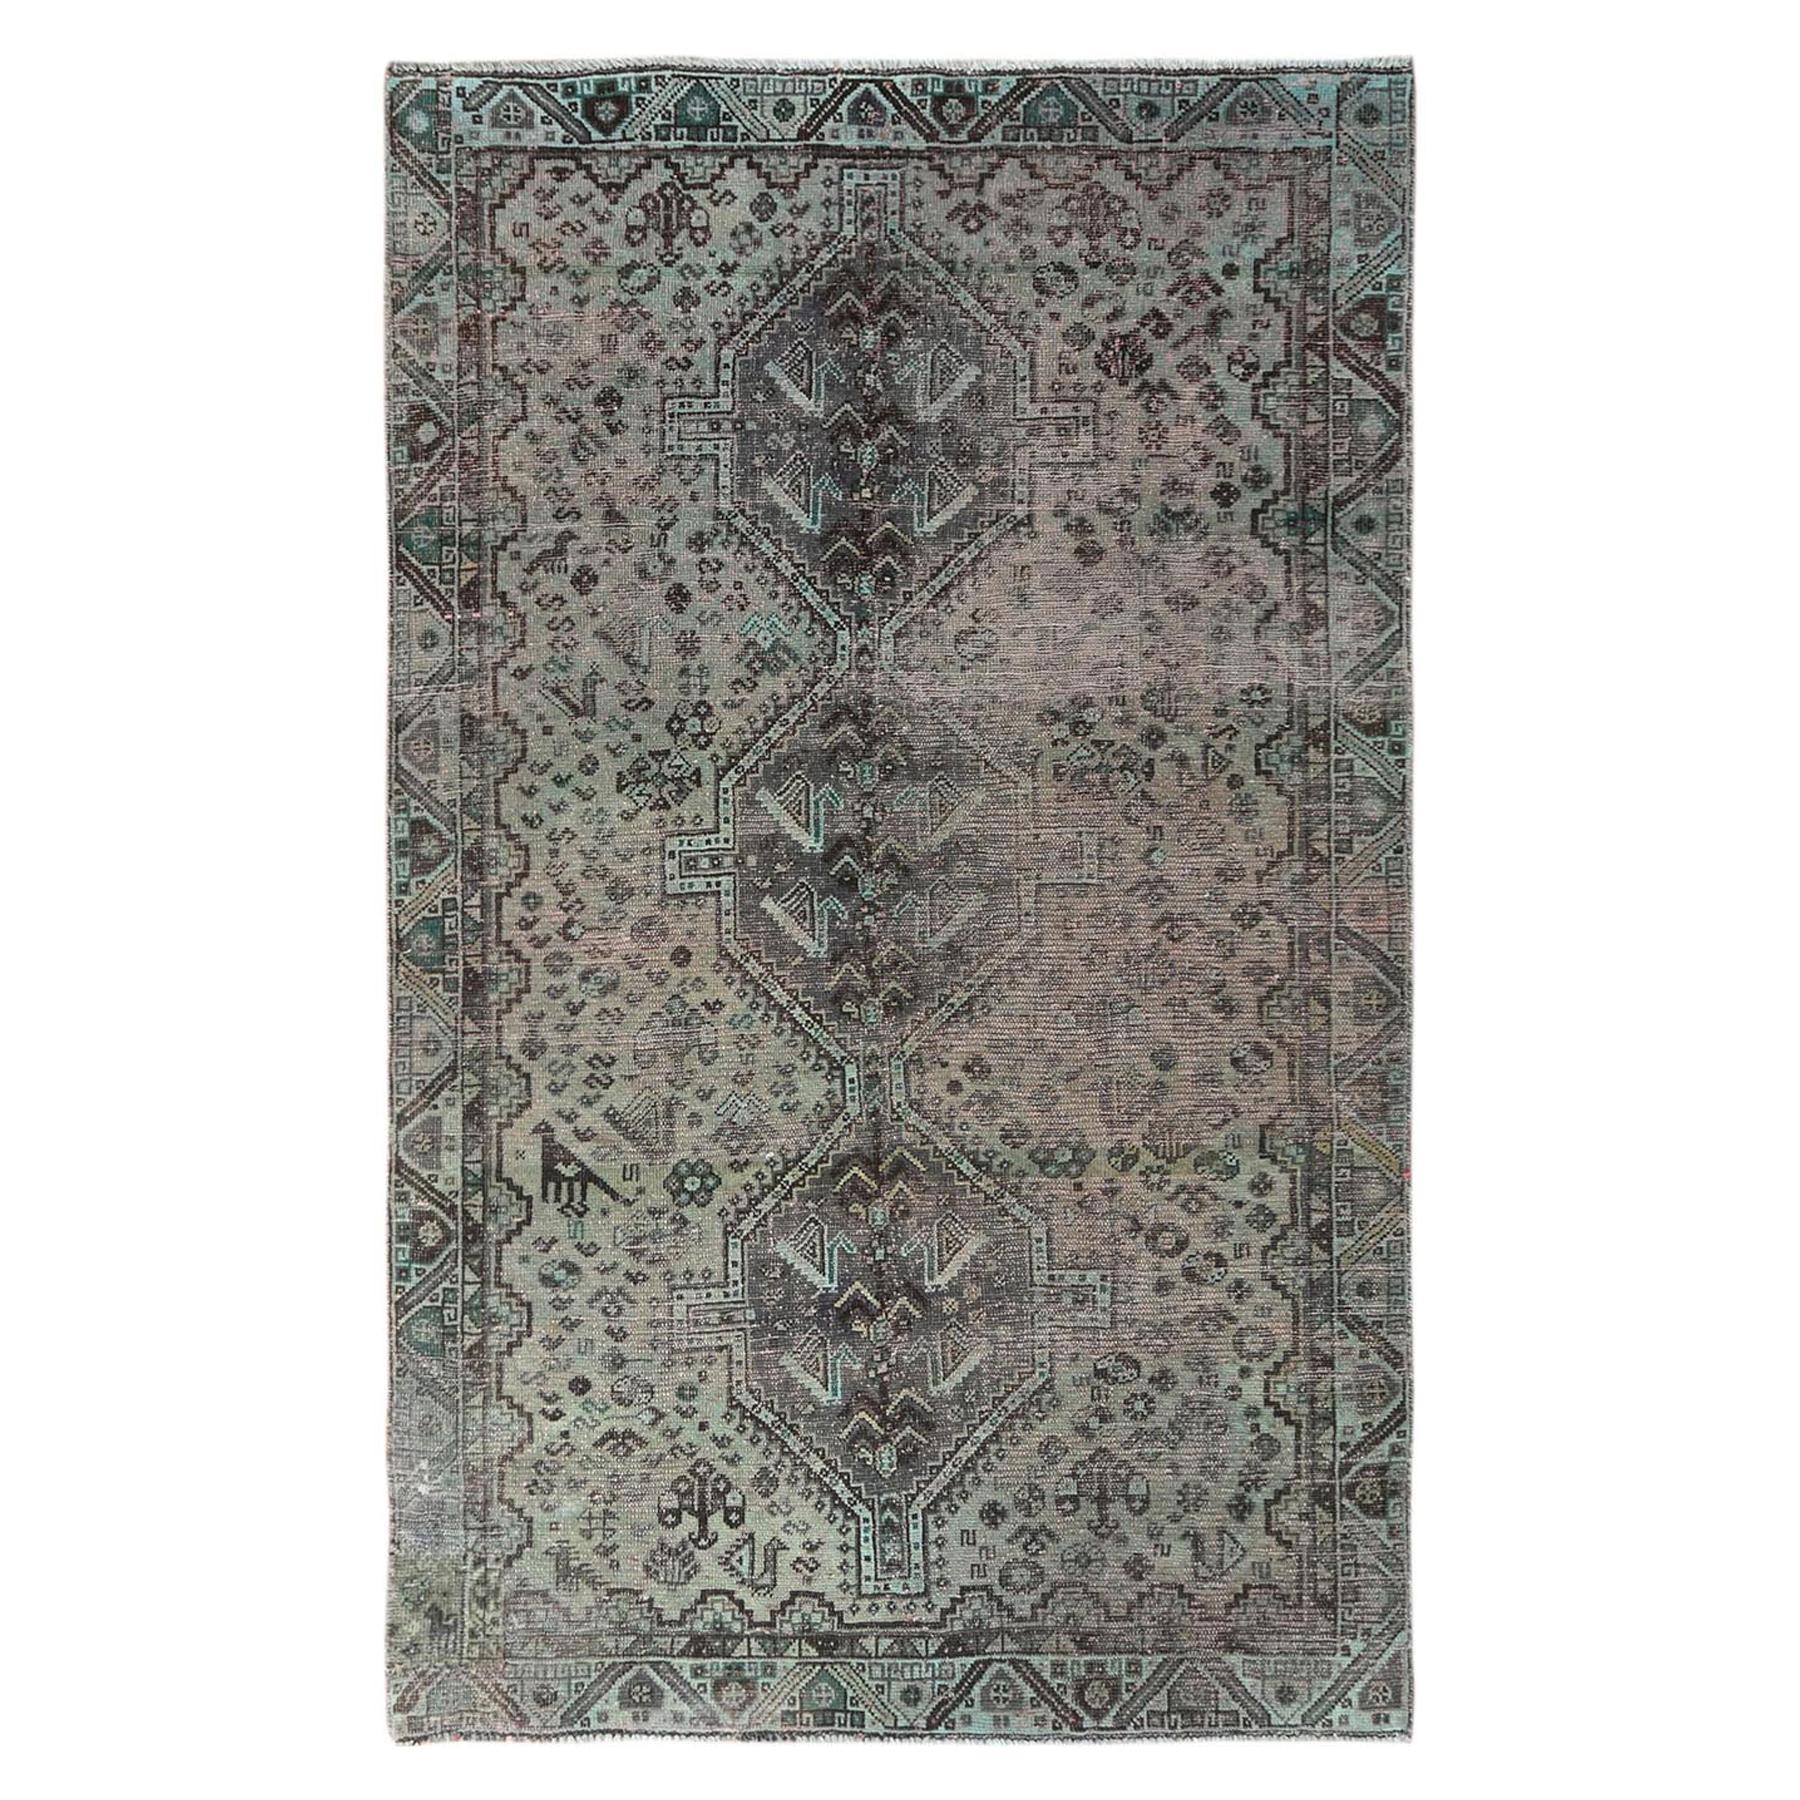 Old Gray Persian Shiraz with Triple Medallion Worn Down Hand Knotted Wool Rug For Sale